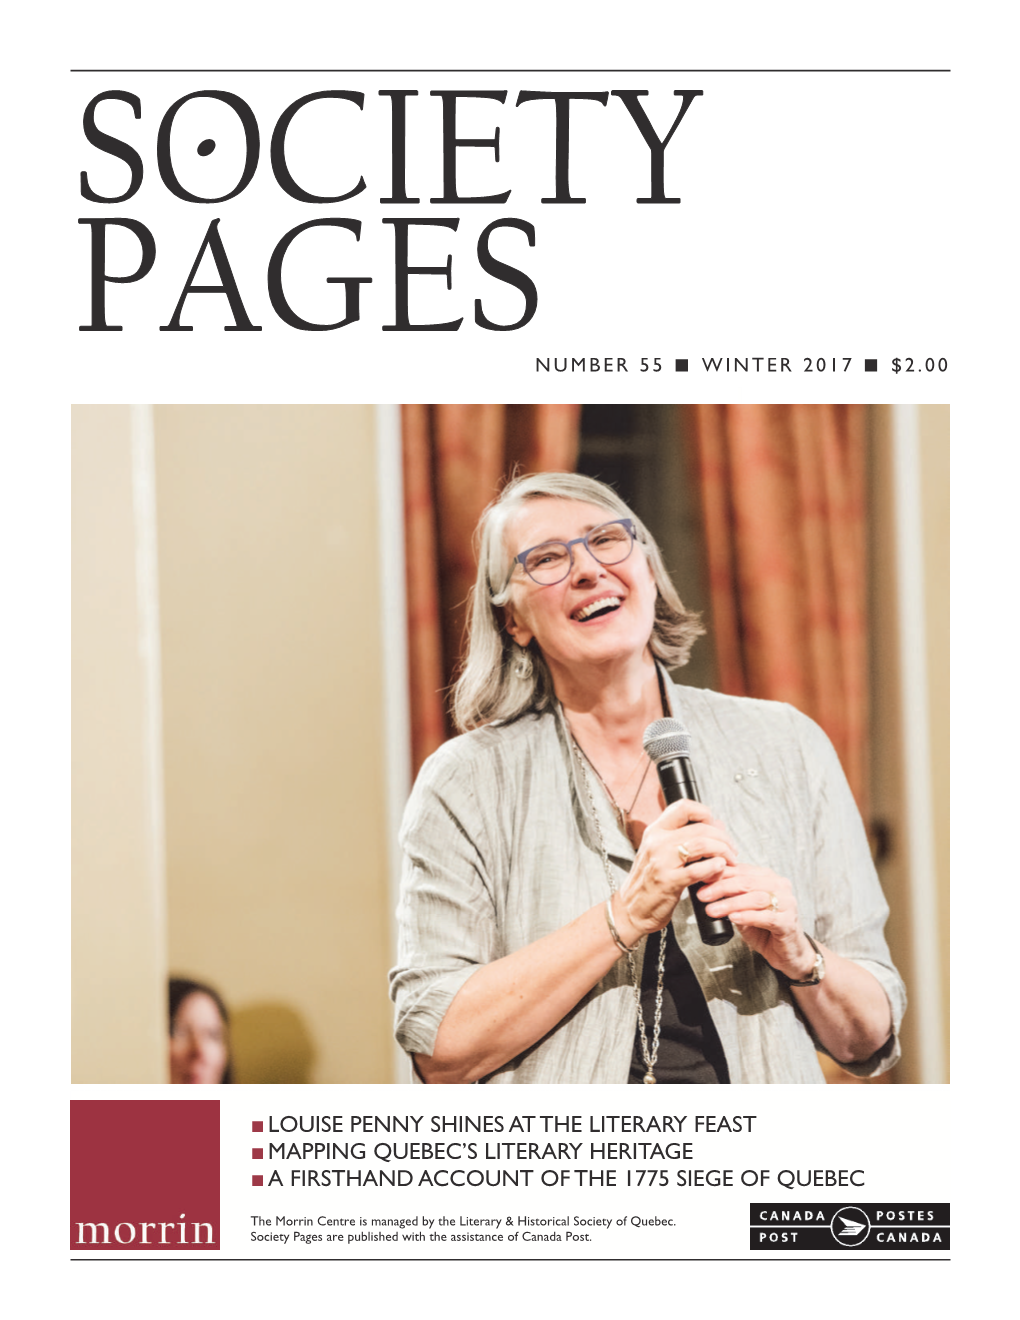 Louise Penny Shines at the Literary Feast ■ Mapping Quebec’S Literary Heritage ■ a Firsthand Account of the 1775 Siege of Quebec